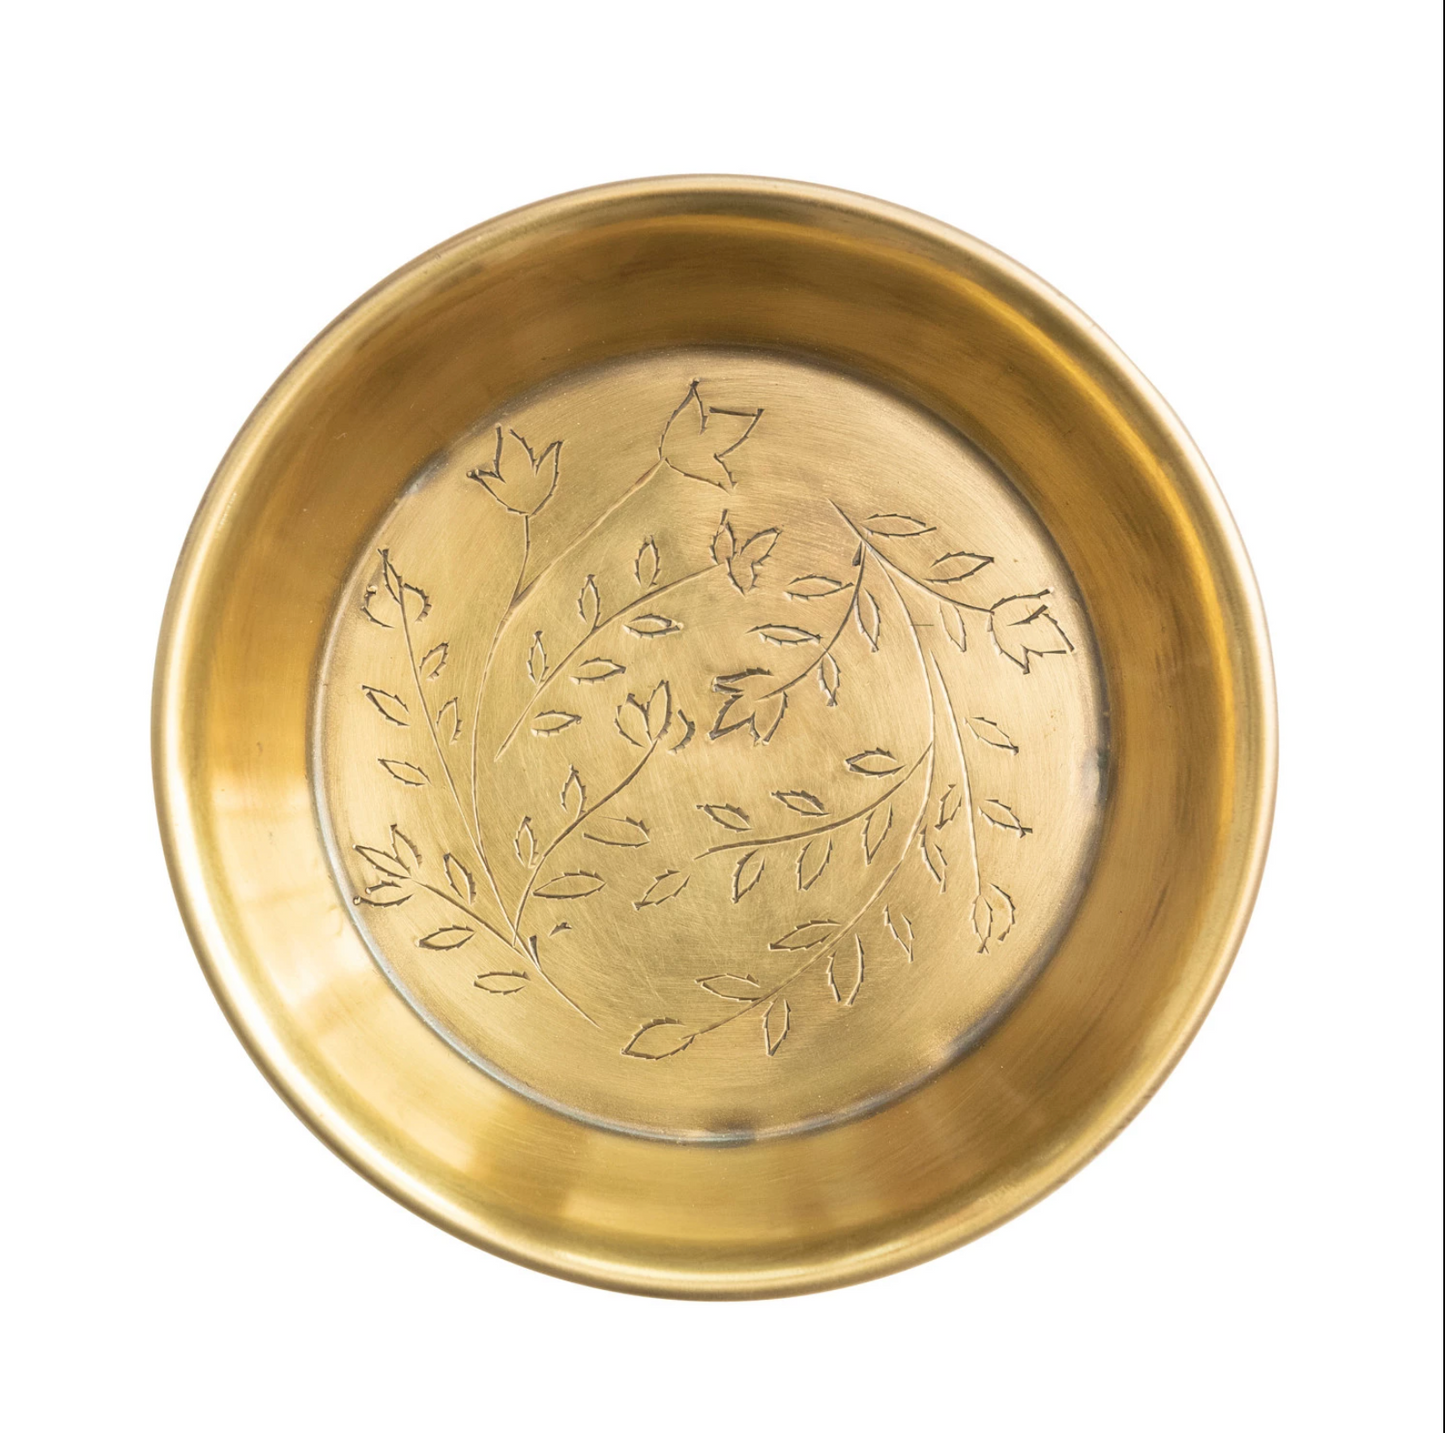 Metal Dish with Etched Floral Design